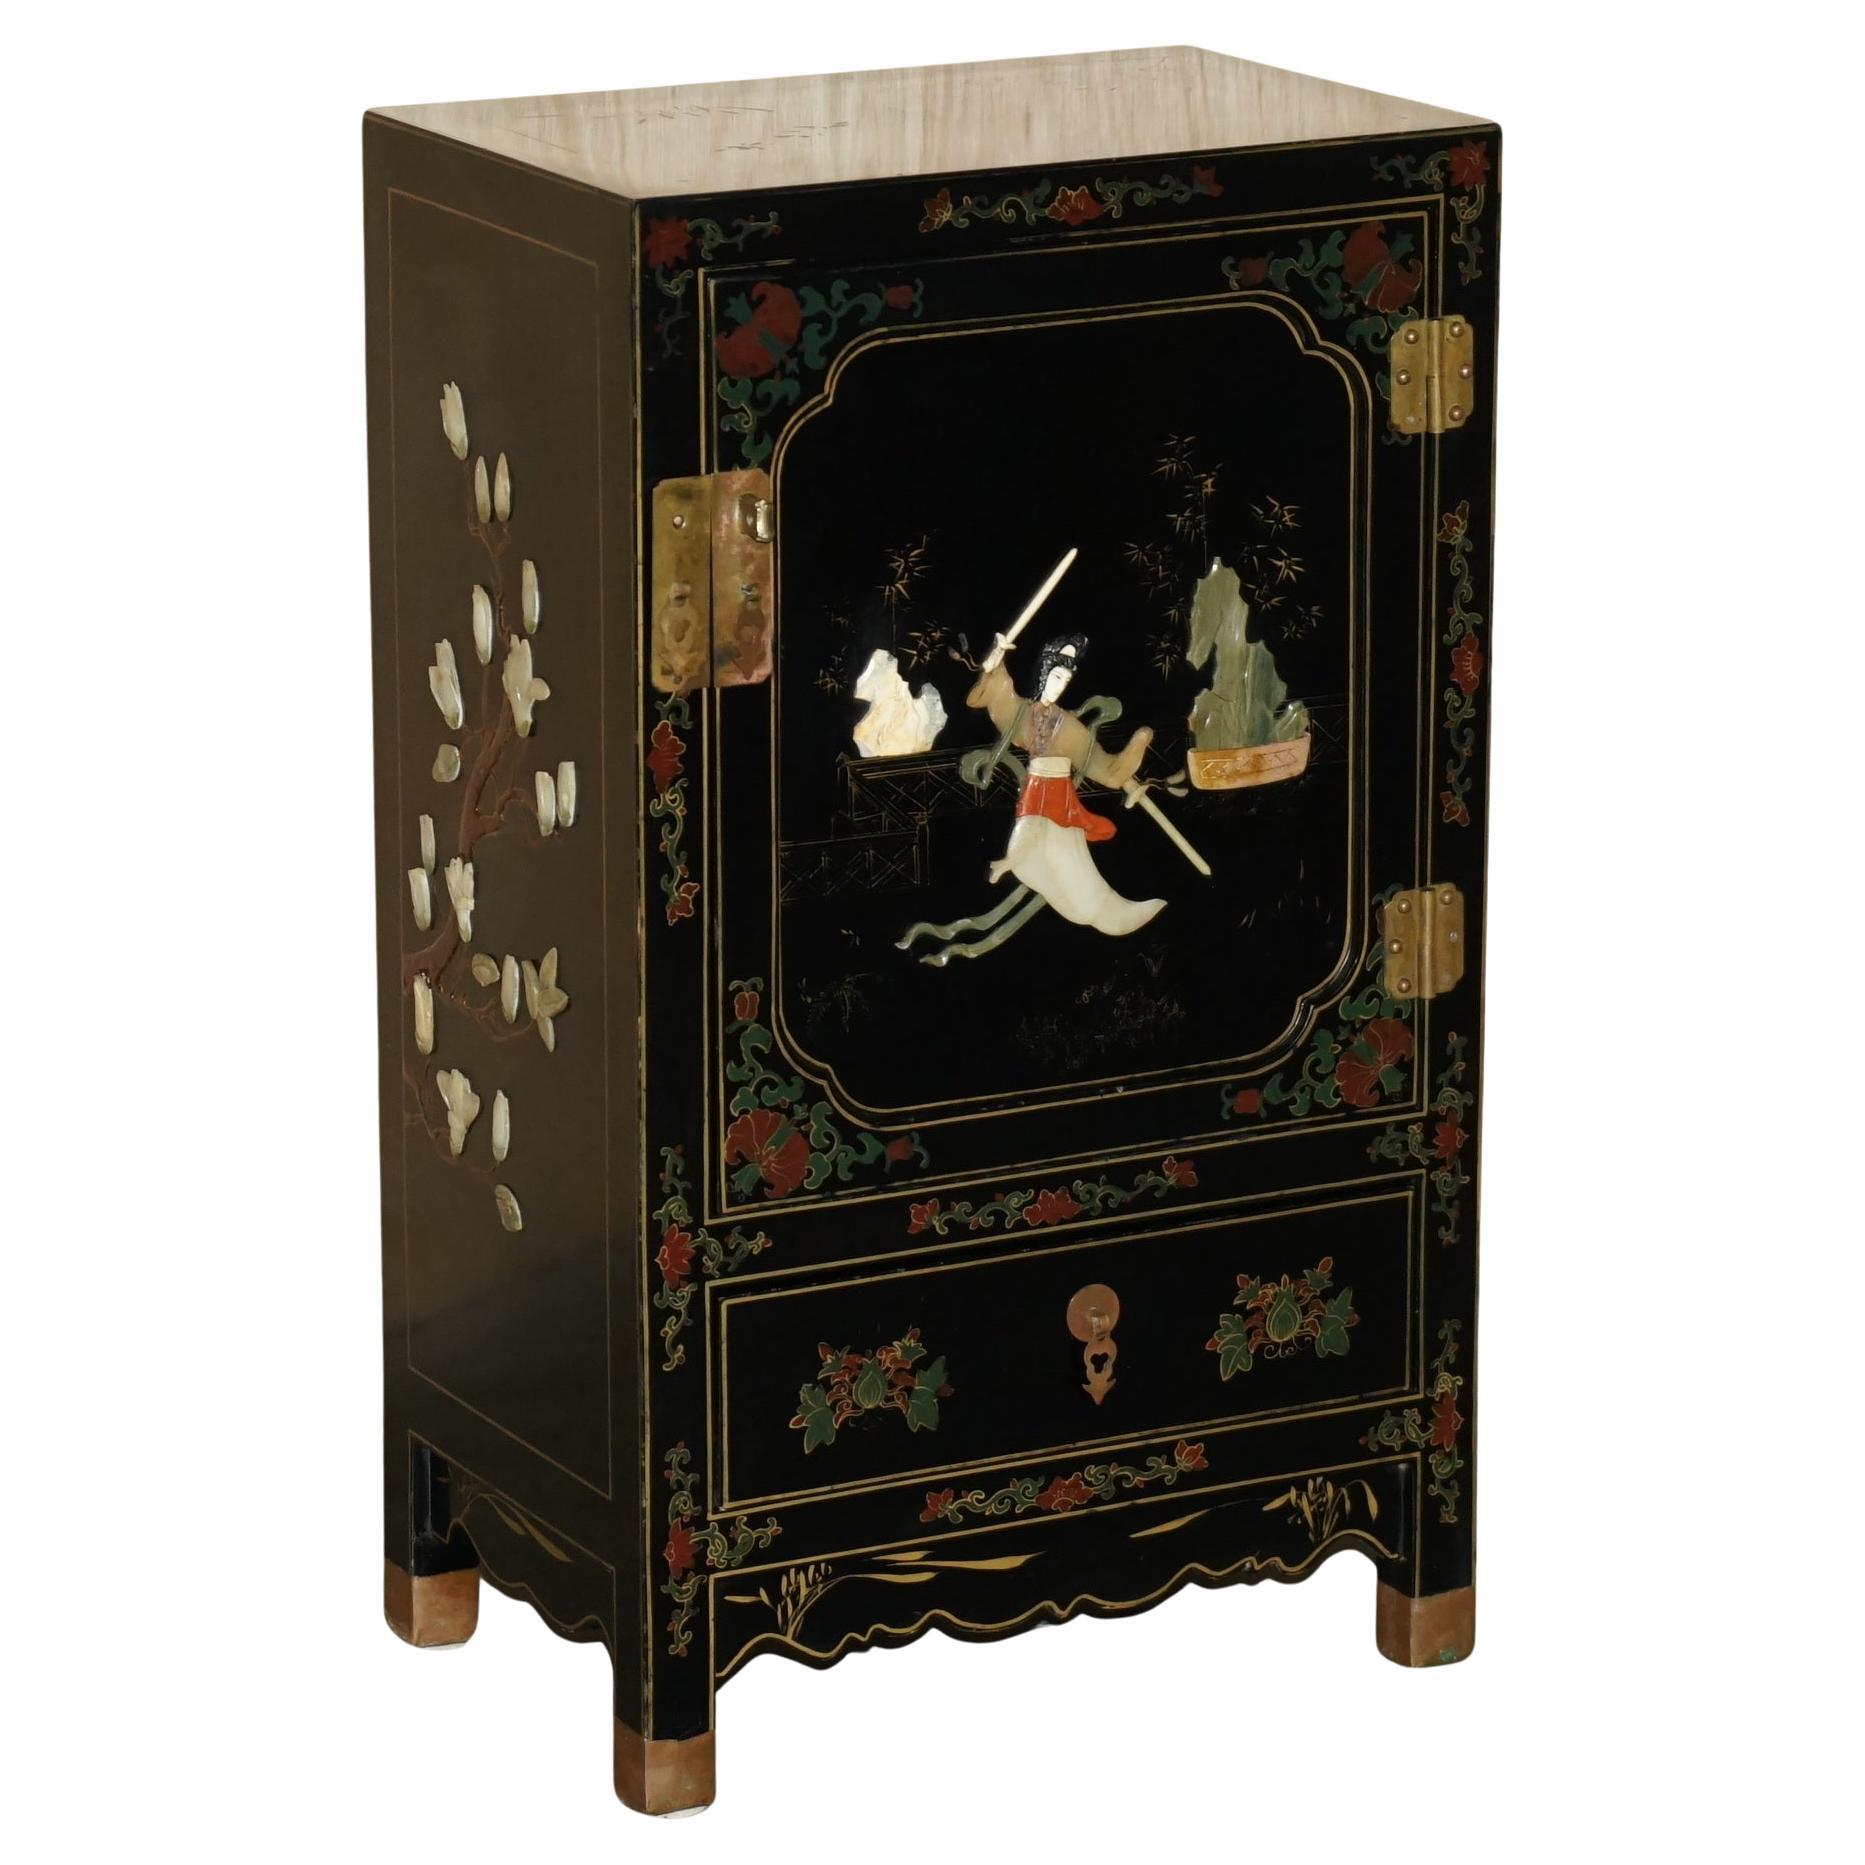 LOVELY ViNTAGE CHINESE CHINOISERIE SAMURAI WARRIOR LACQUER SIDE CABINET SOAPSTON For Sale